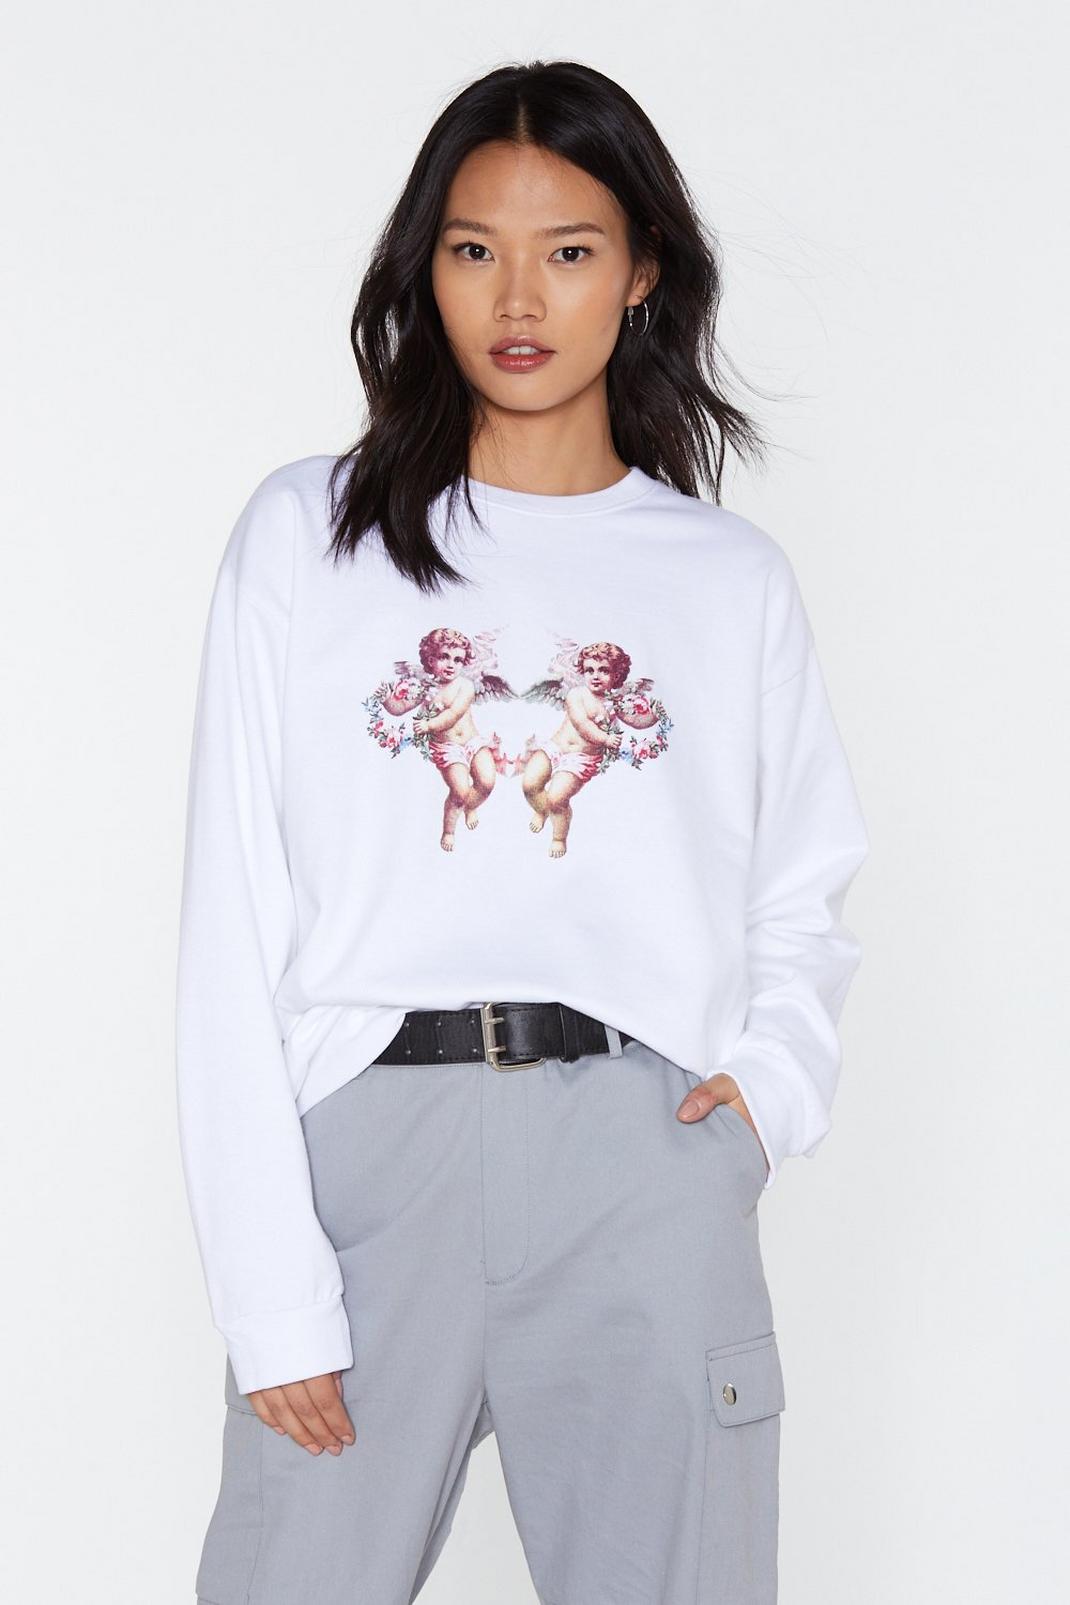 Angels Cry Cherub Relaxed Sweatshirt image number 1